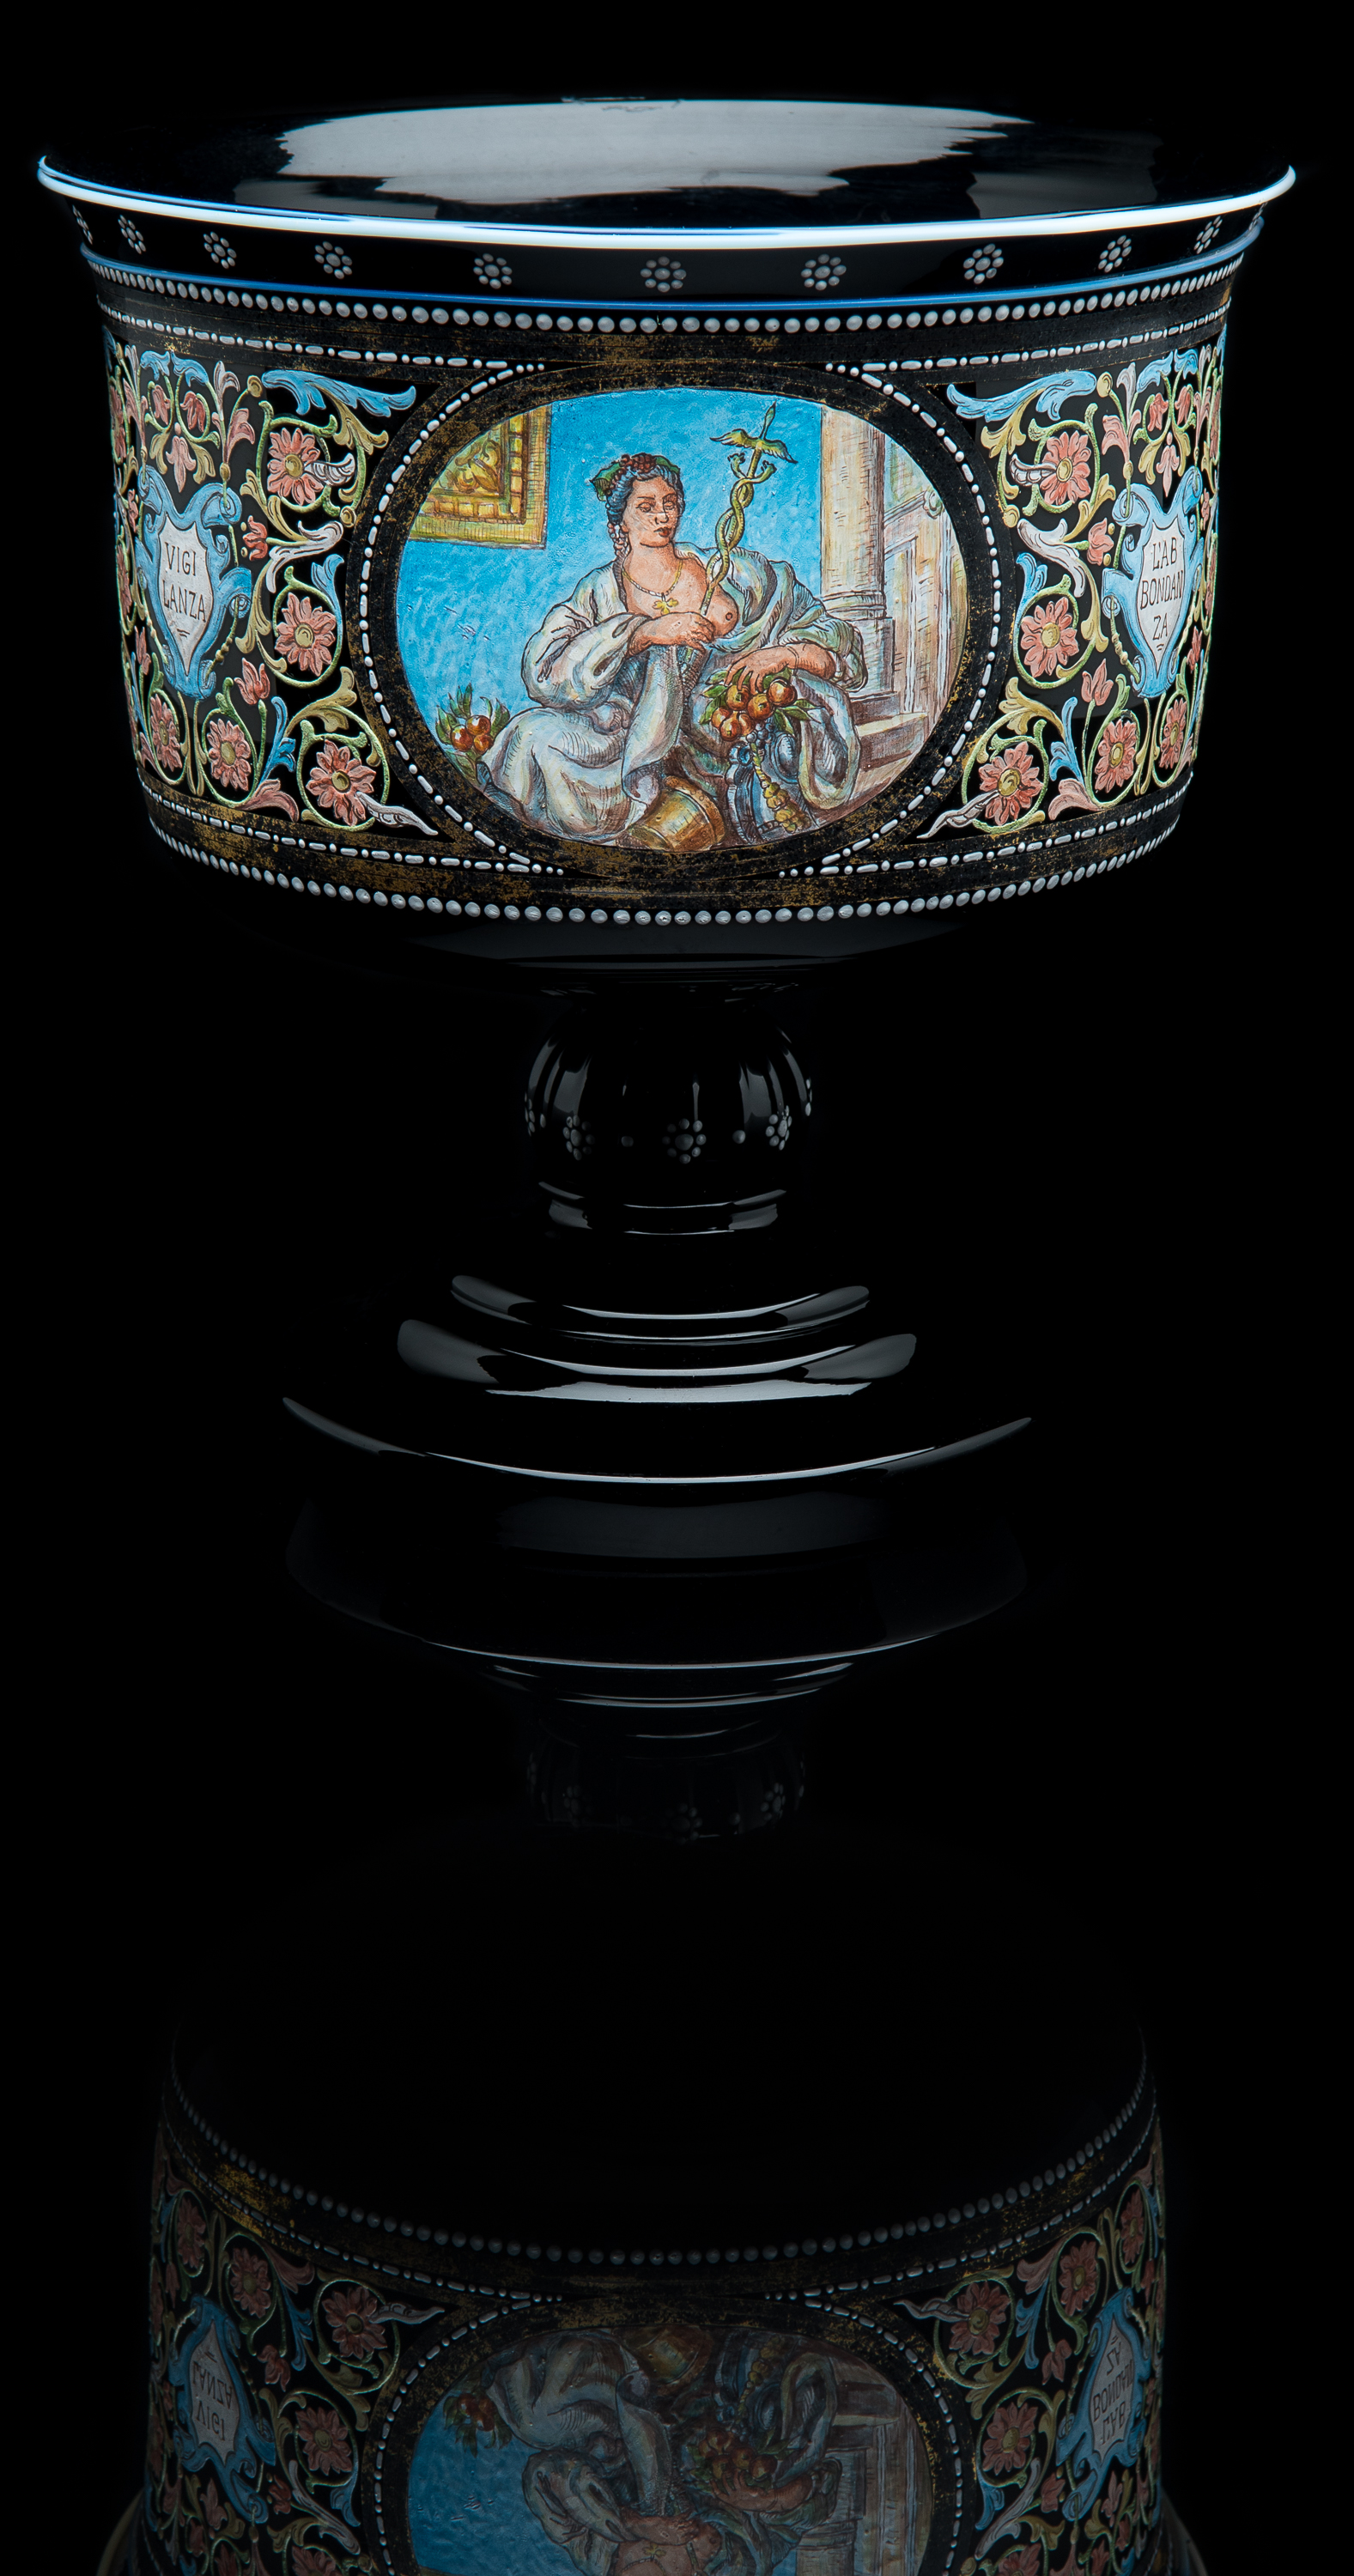  Unknown,  Amethyst Pedestal Bowl with Enameled Neoclassical Women  (glass, 7.5 inches), VV.1024 